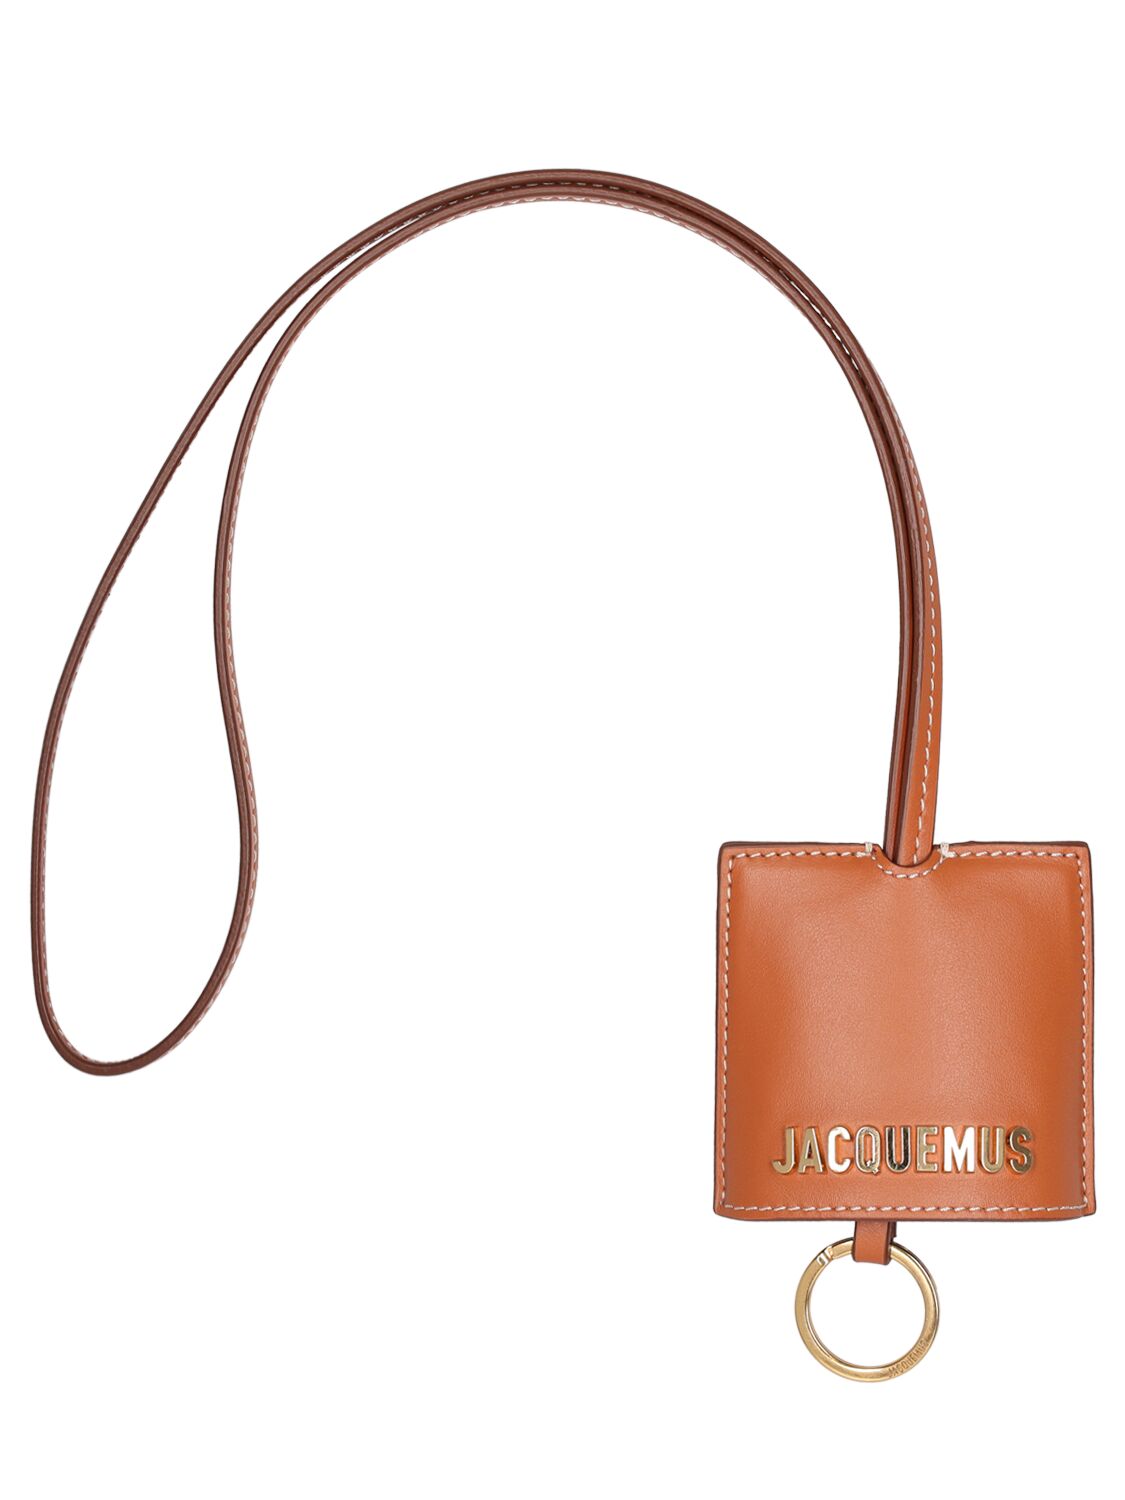 Jacquemus Le Porte Cle Bagage Key Holder In Light Brown 2